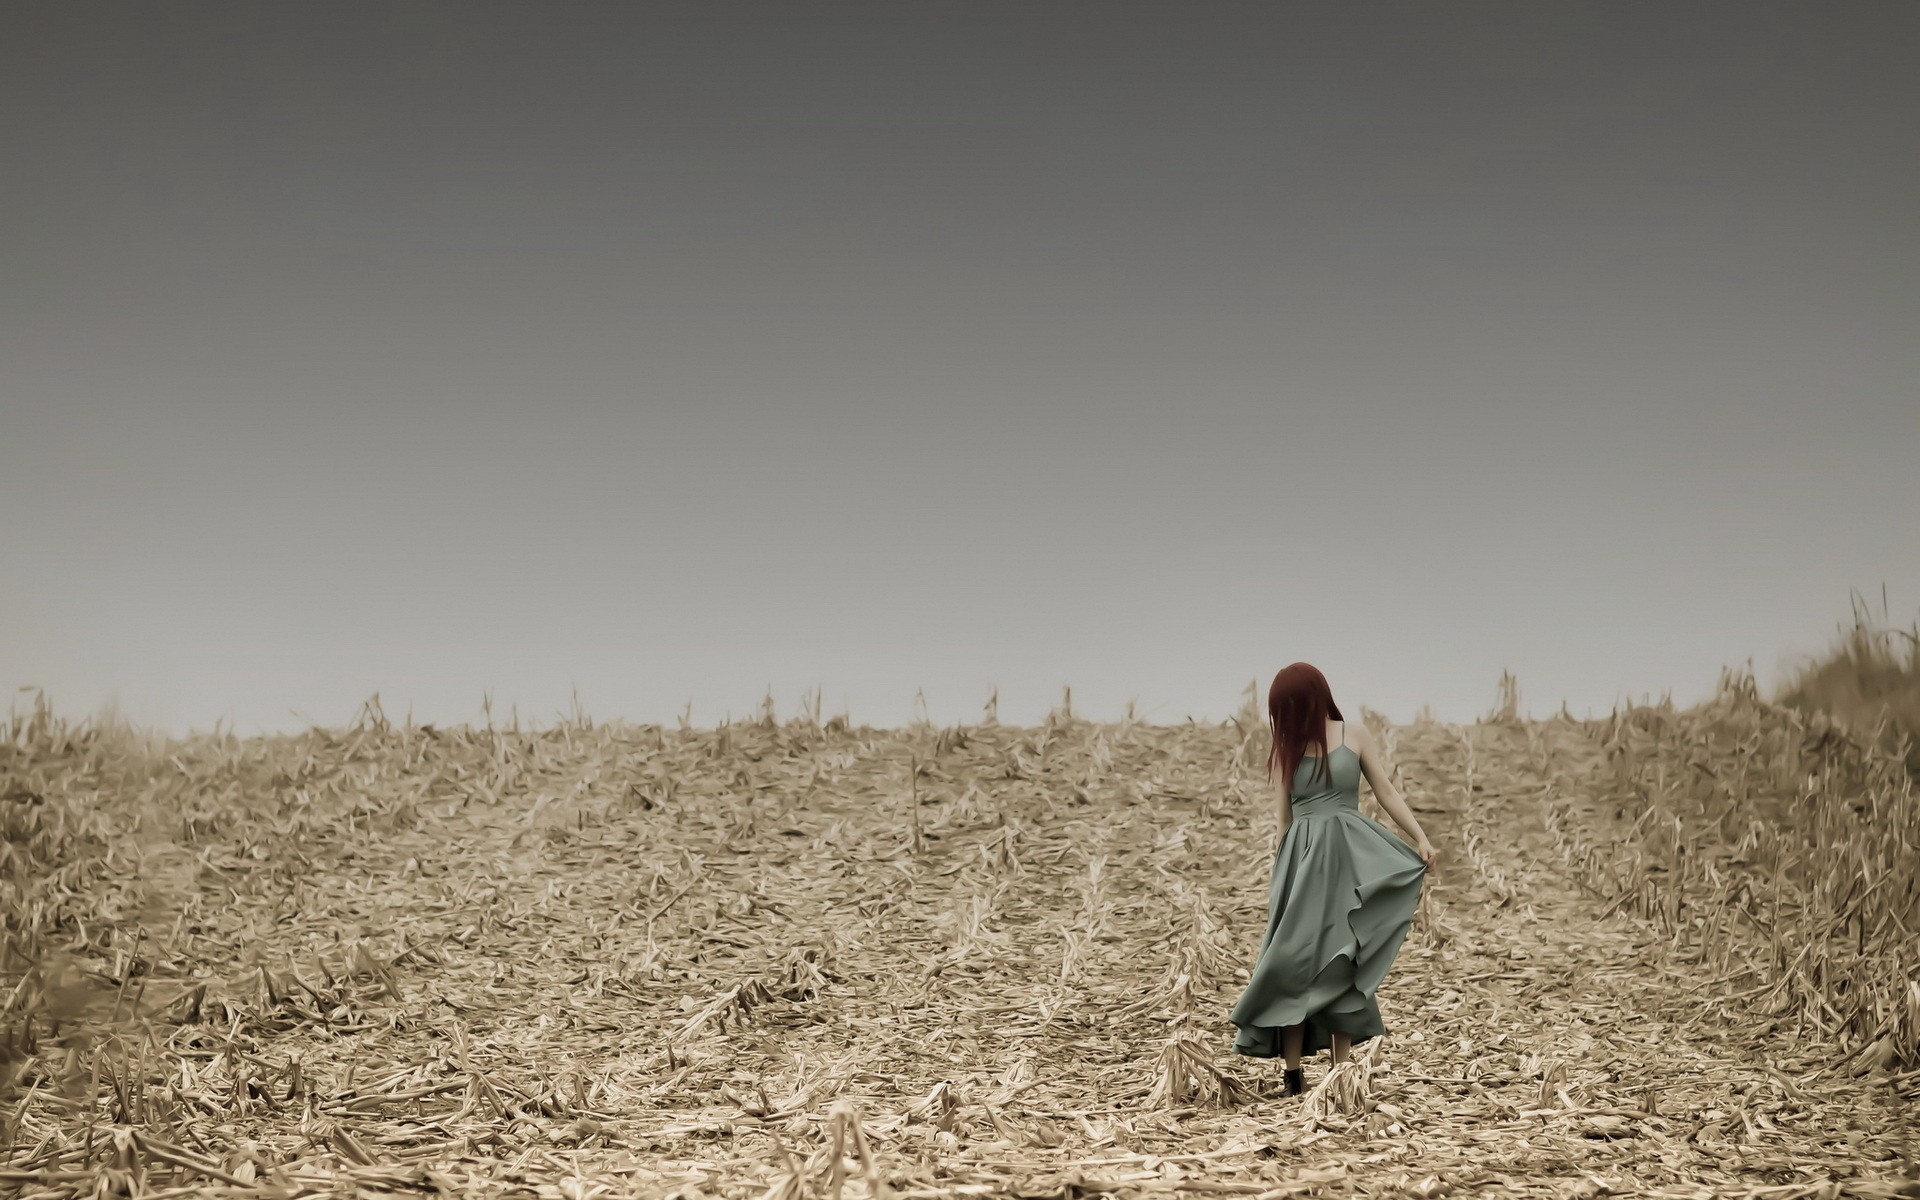 people, Redhead, Gothic, Mood, Emotion, Dress, Pose, Landscapes, Nature, Fields, Harvest, Stalk, Sky, Alone, Women, Female, Girl, Sensual, Pose, Photography, Model, Styl Wallpaper